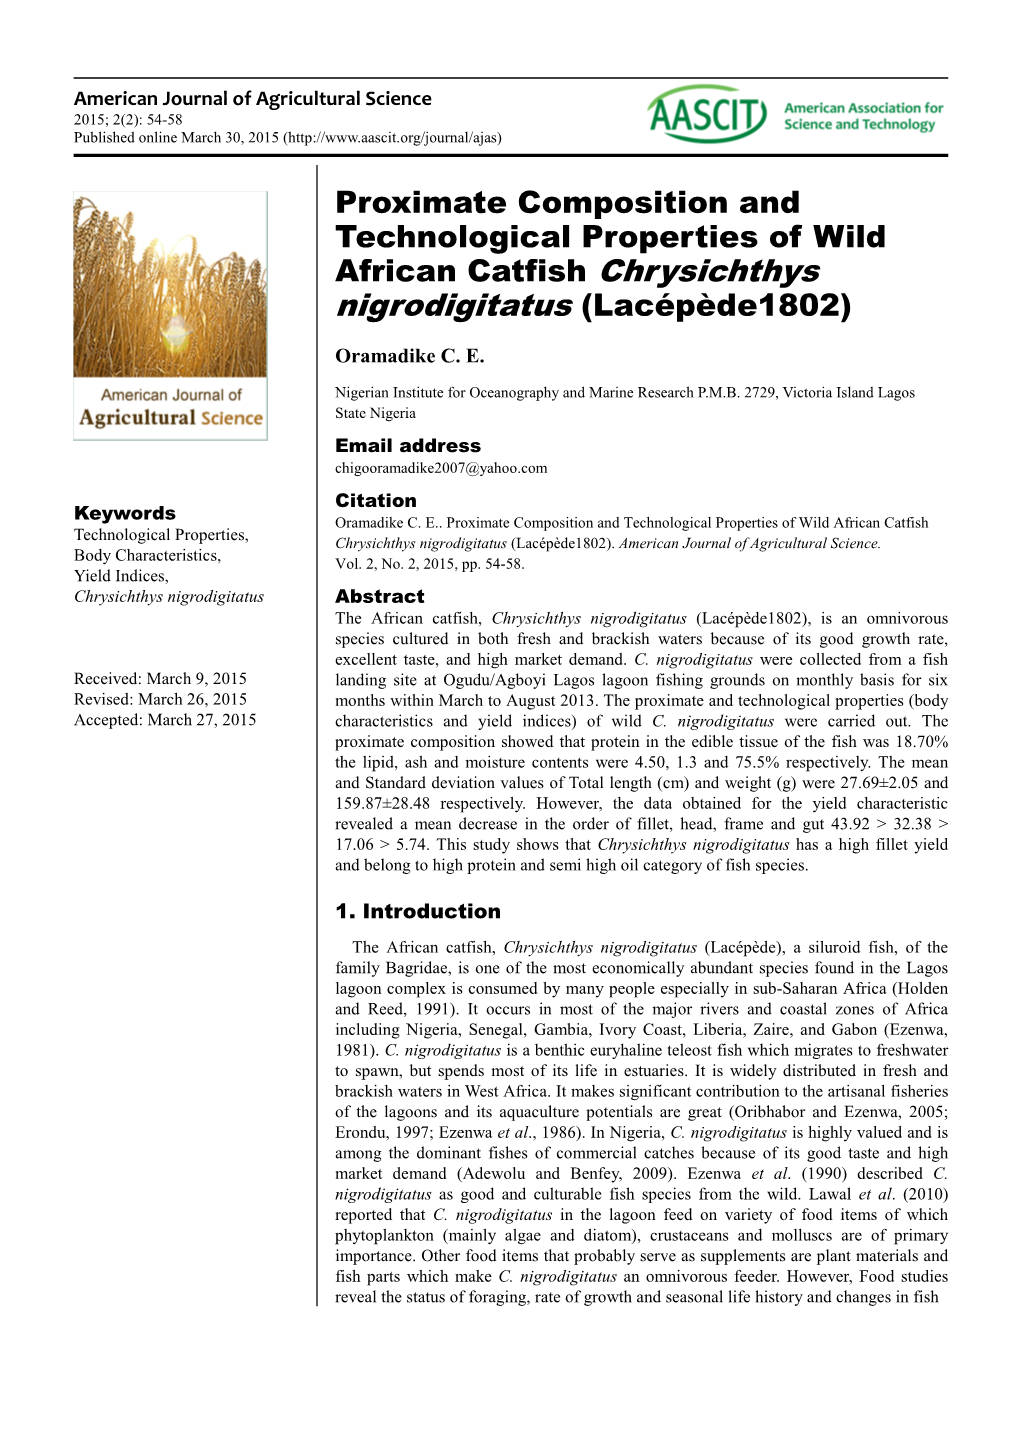 Proximate Composition and Technological Properties of Wild African Catfish Chrysichthys Nigrodigitatus (Lacépède1802)